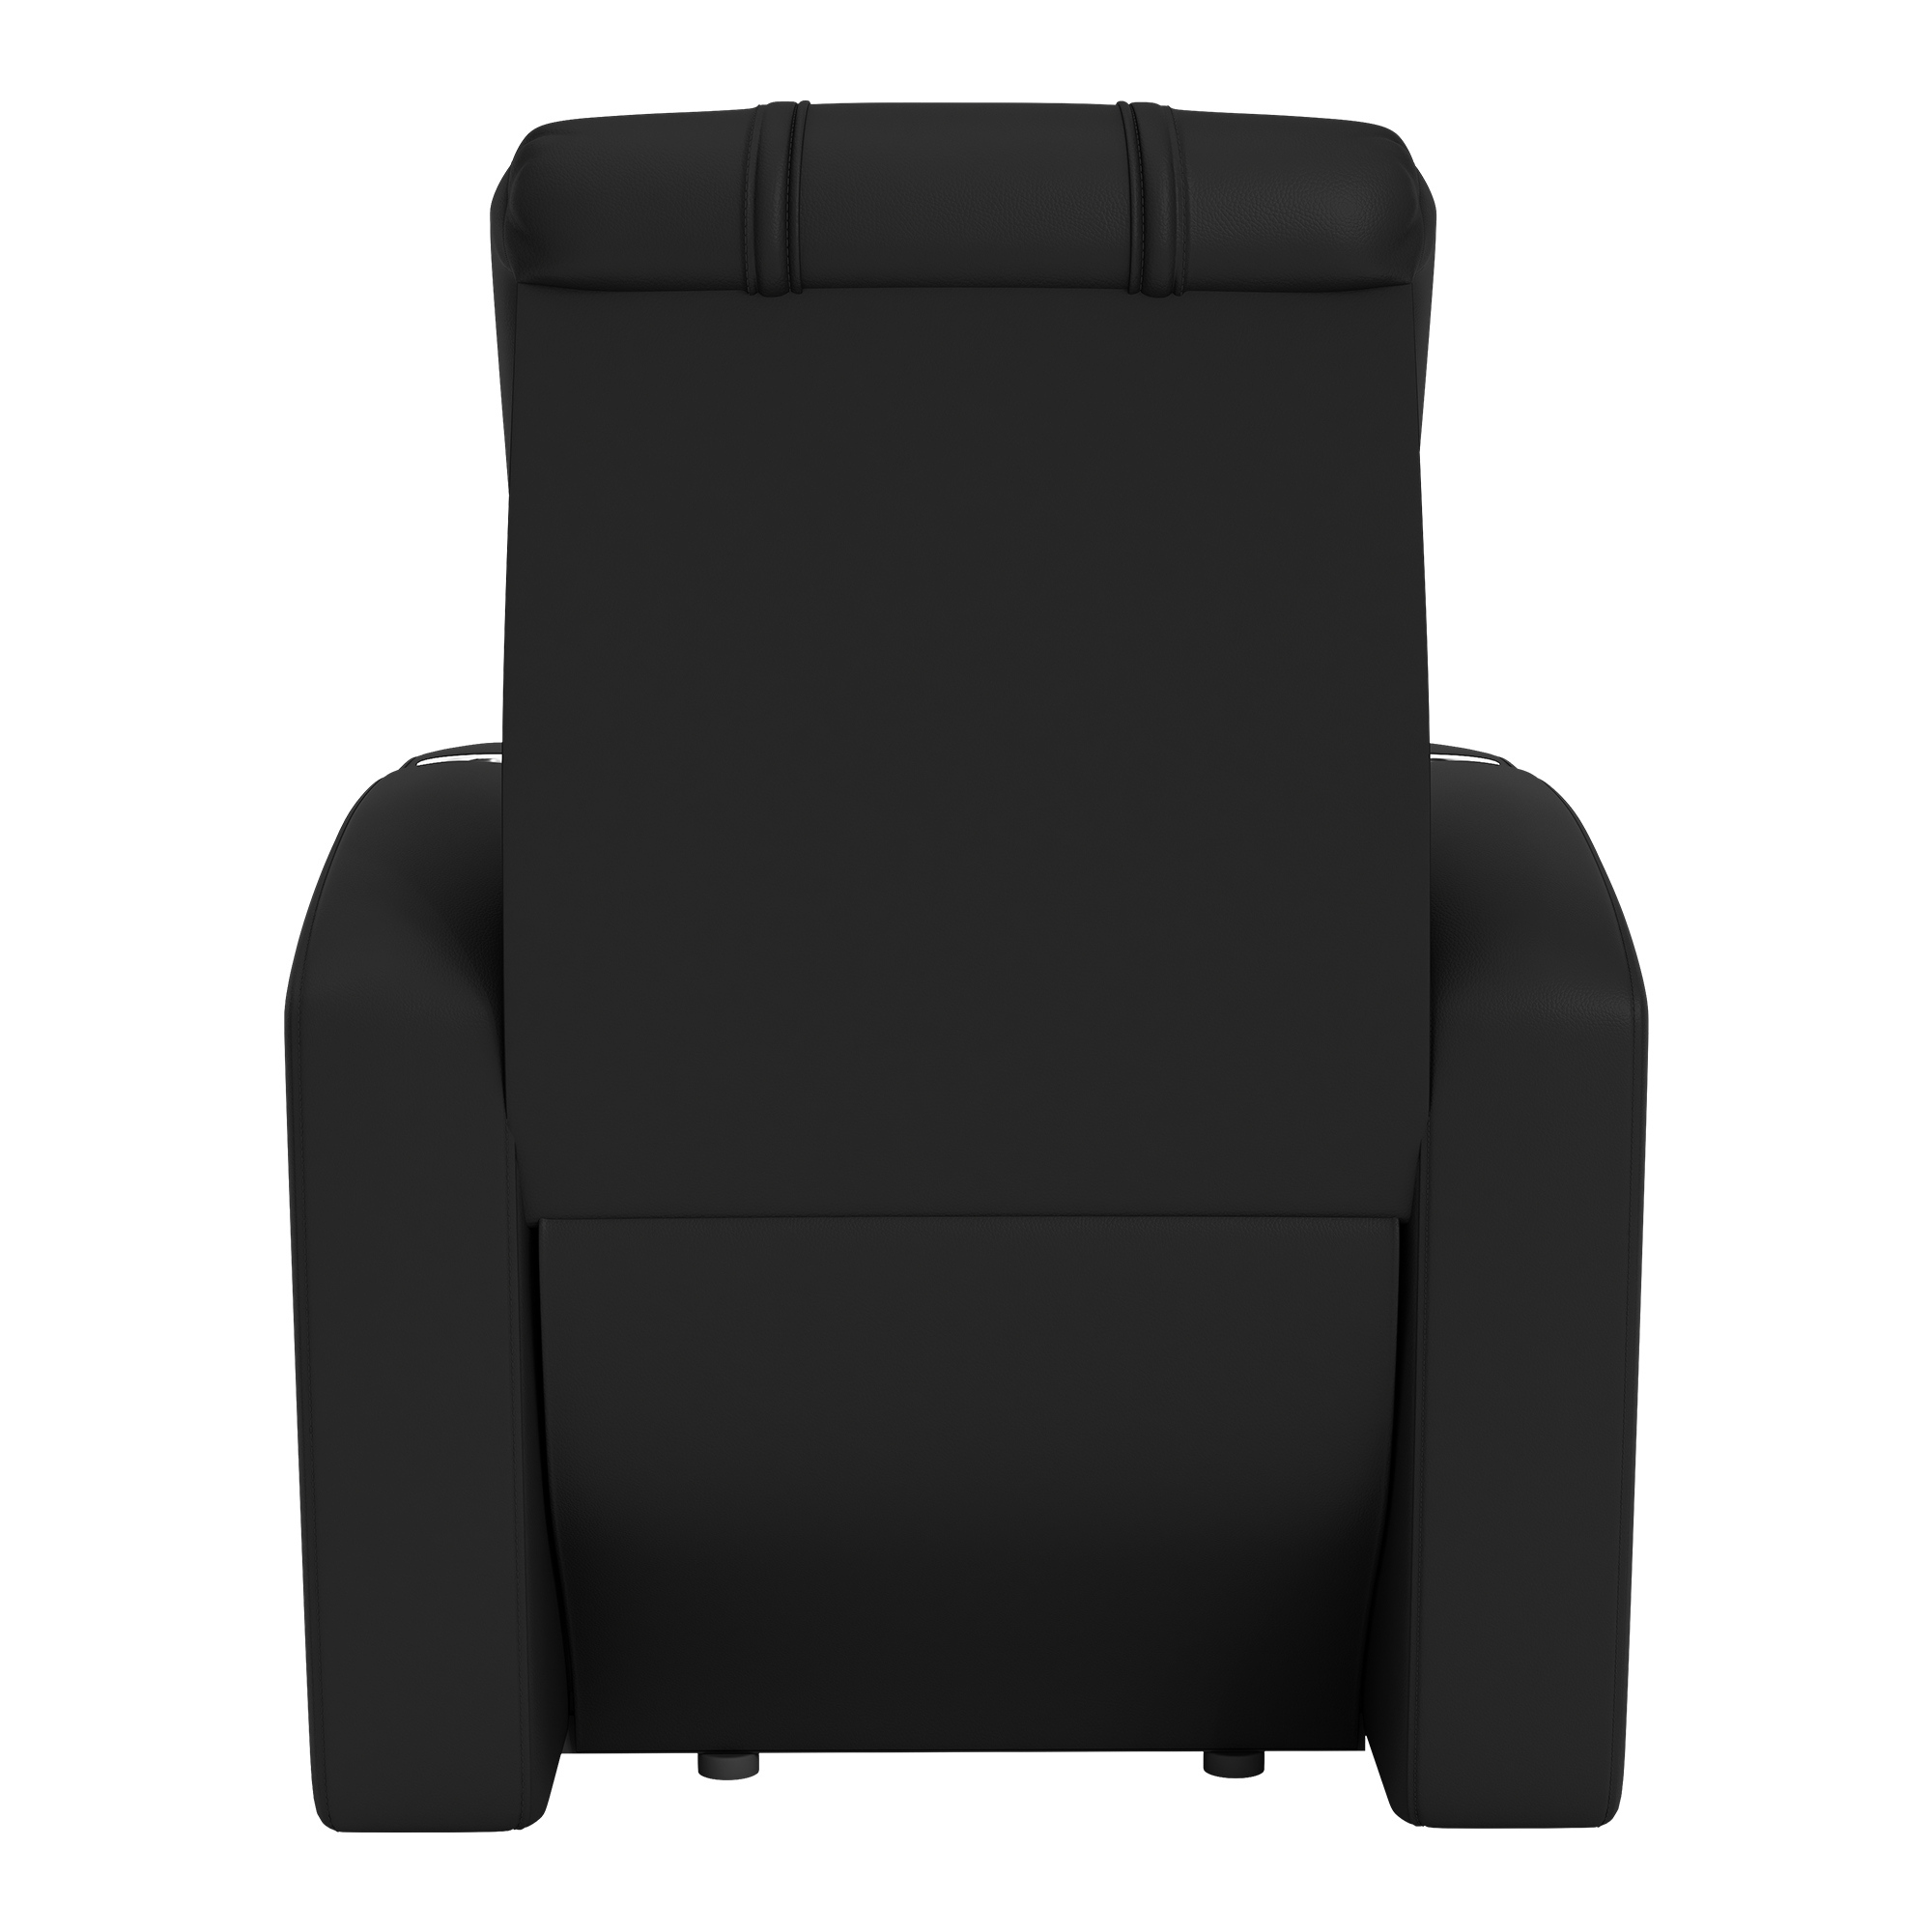 Stealth Recliner with San Francisco Giants Cooperstown